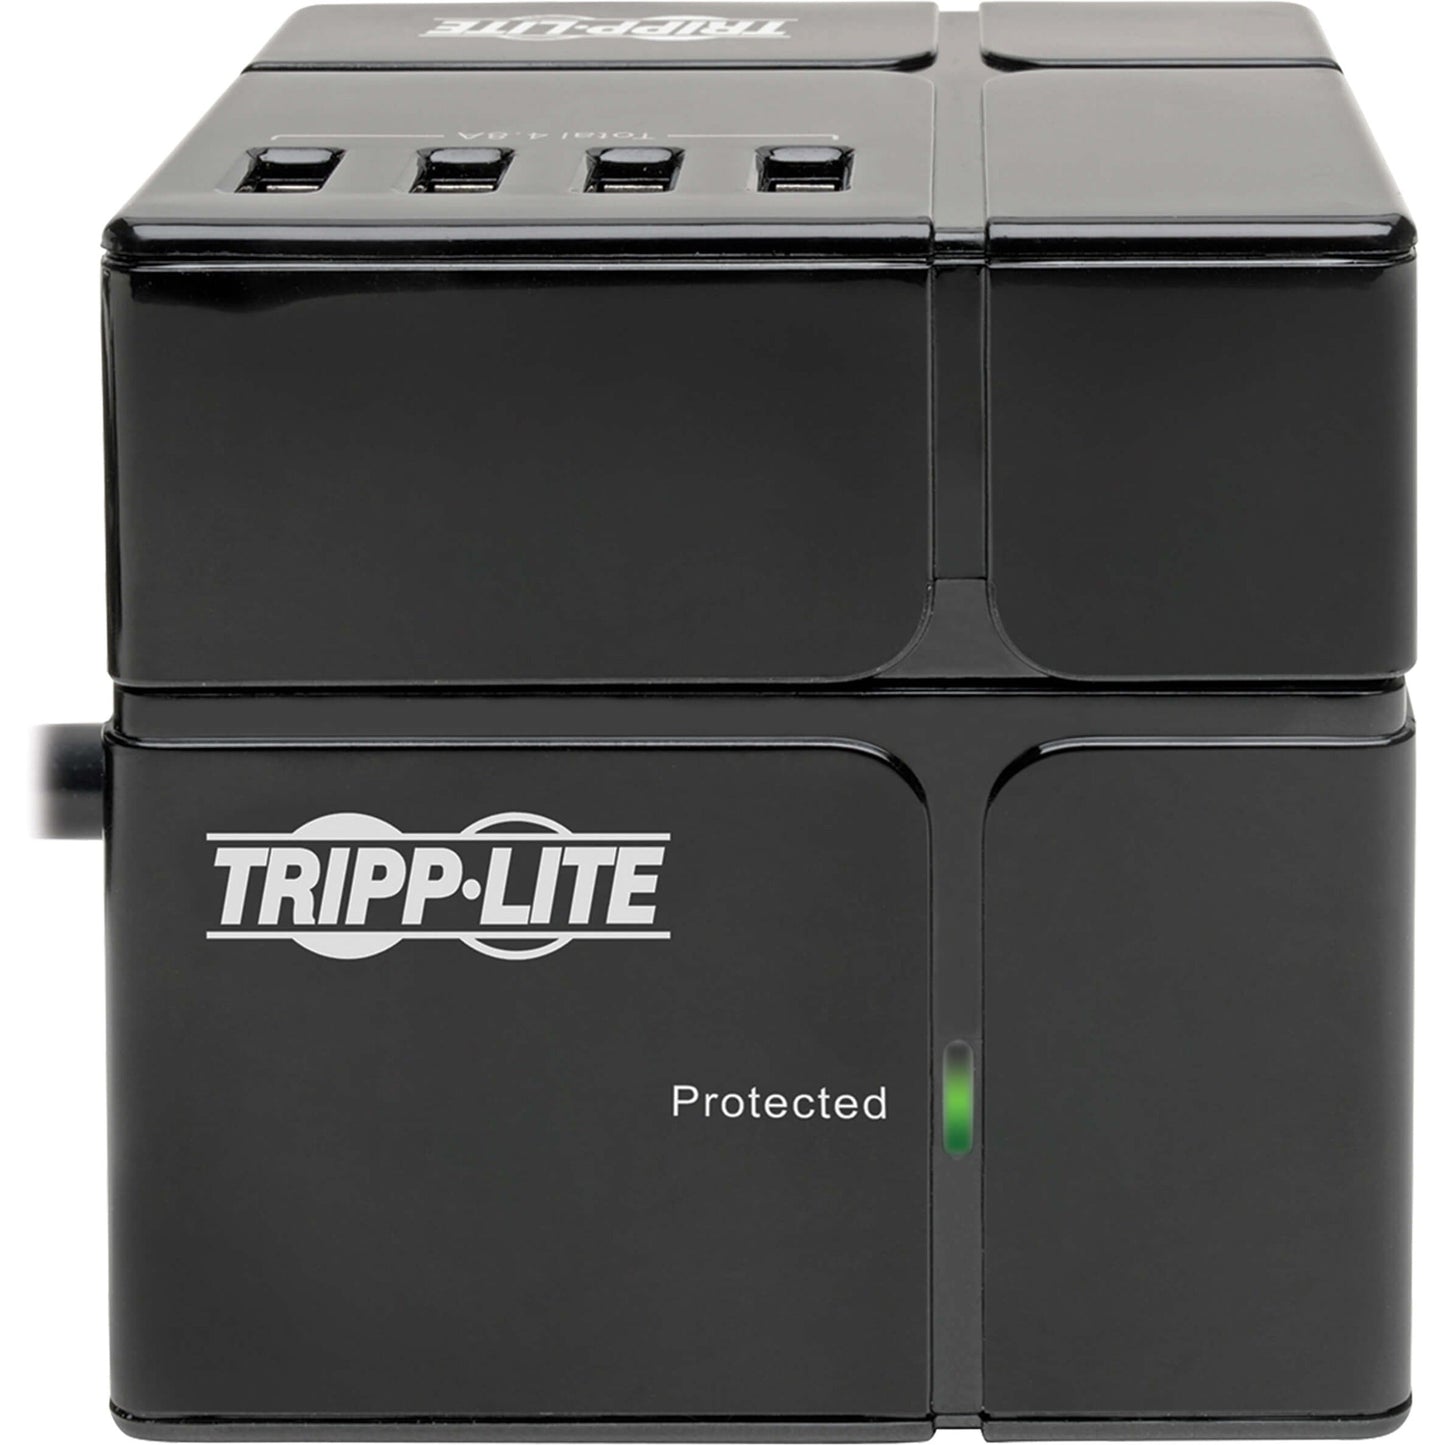 Tripp Lite Safe-IT 3-Outlet Cube Surge Protector 5-15R Outlets 6 USB Charging Ports 8 ft. (2.4 m) Cord Antimicrobial Protection